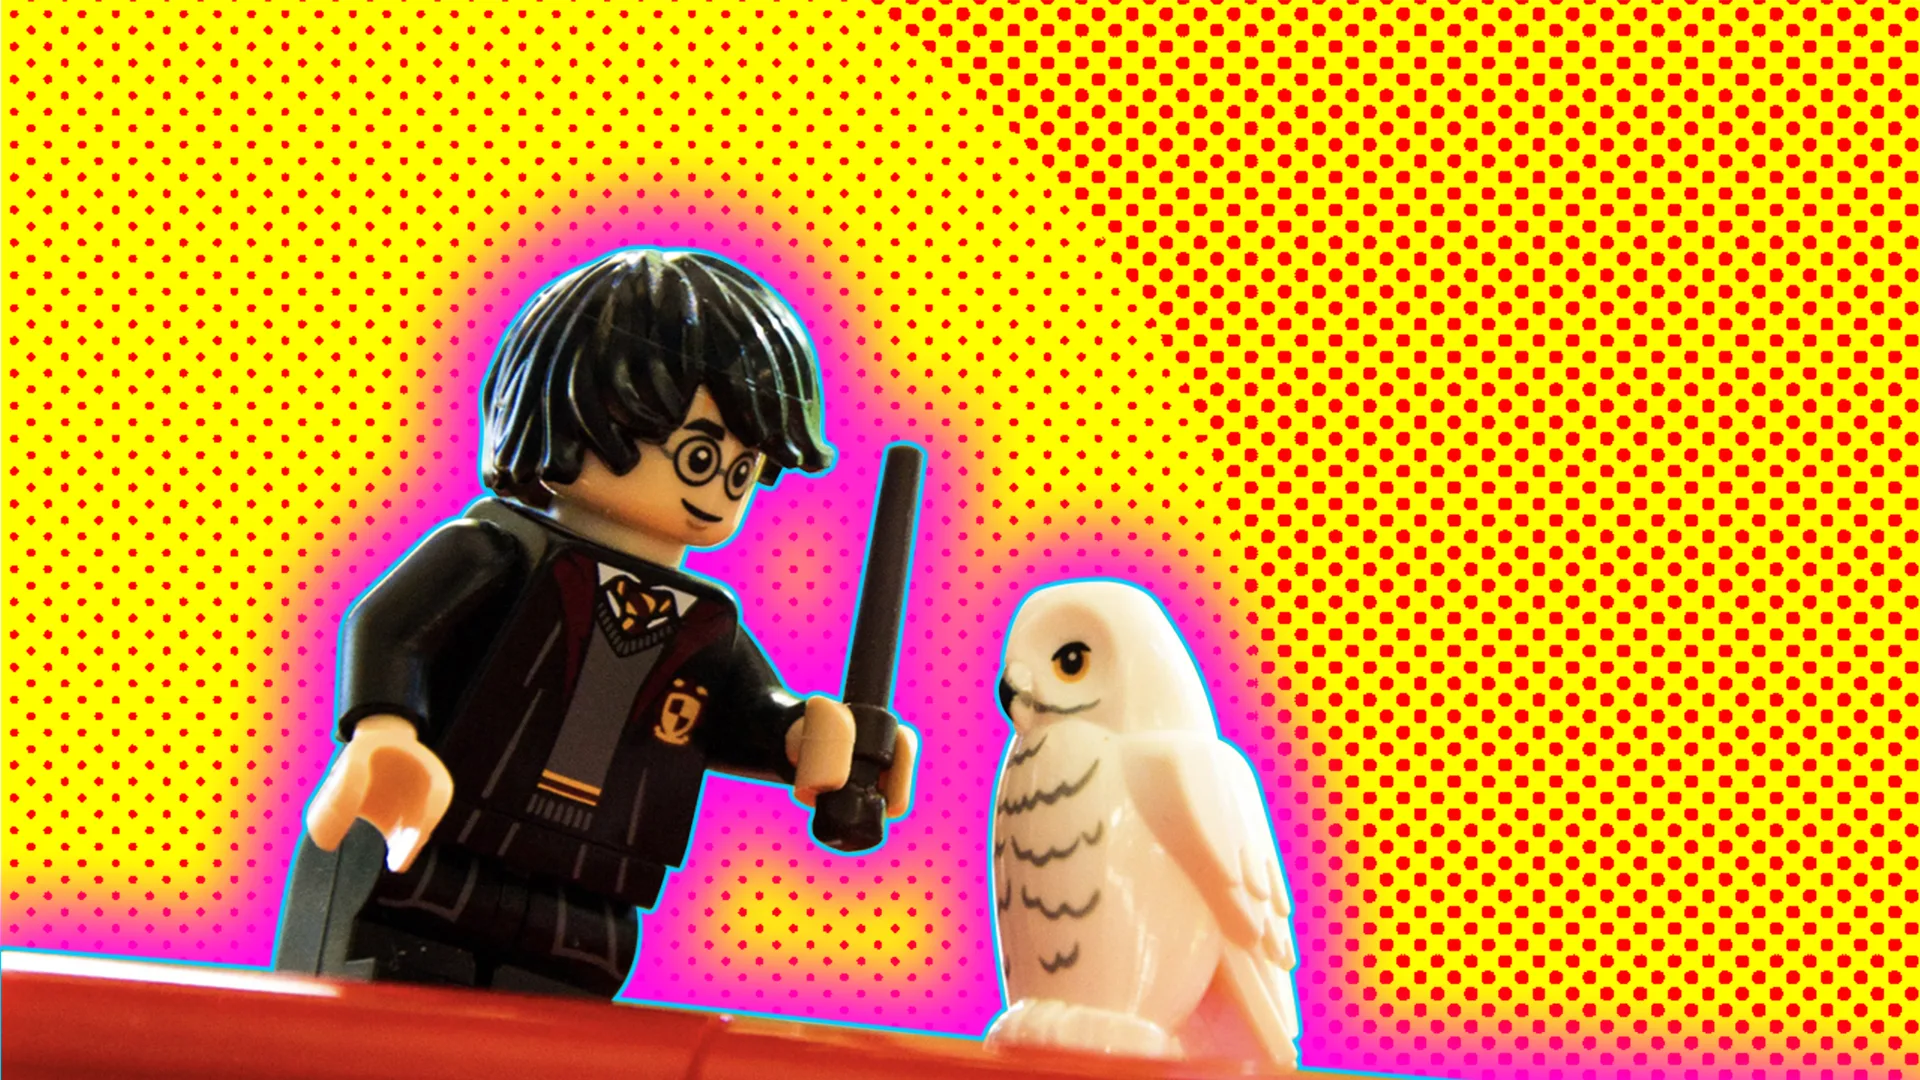 Lego Harry Potter & Hedwig the owl - in graphic house style